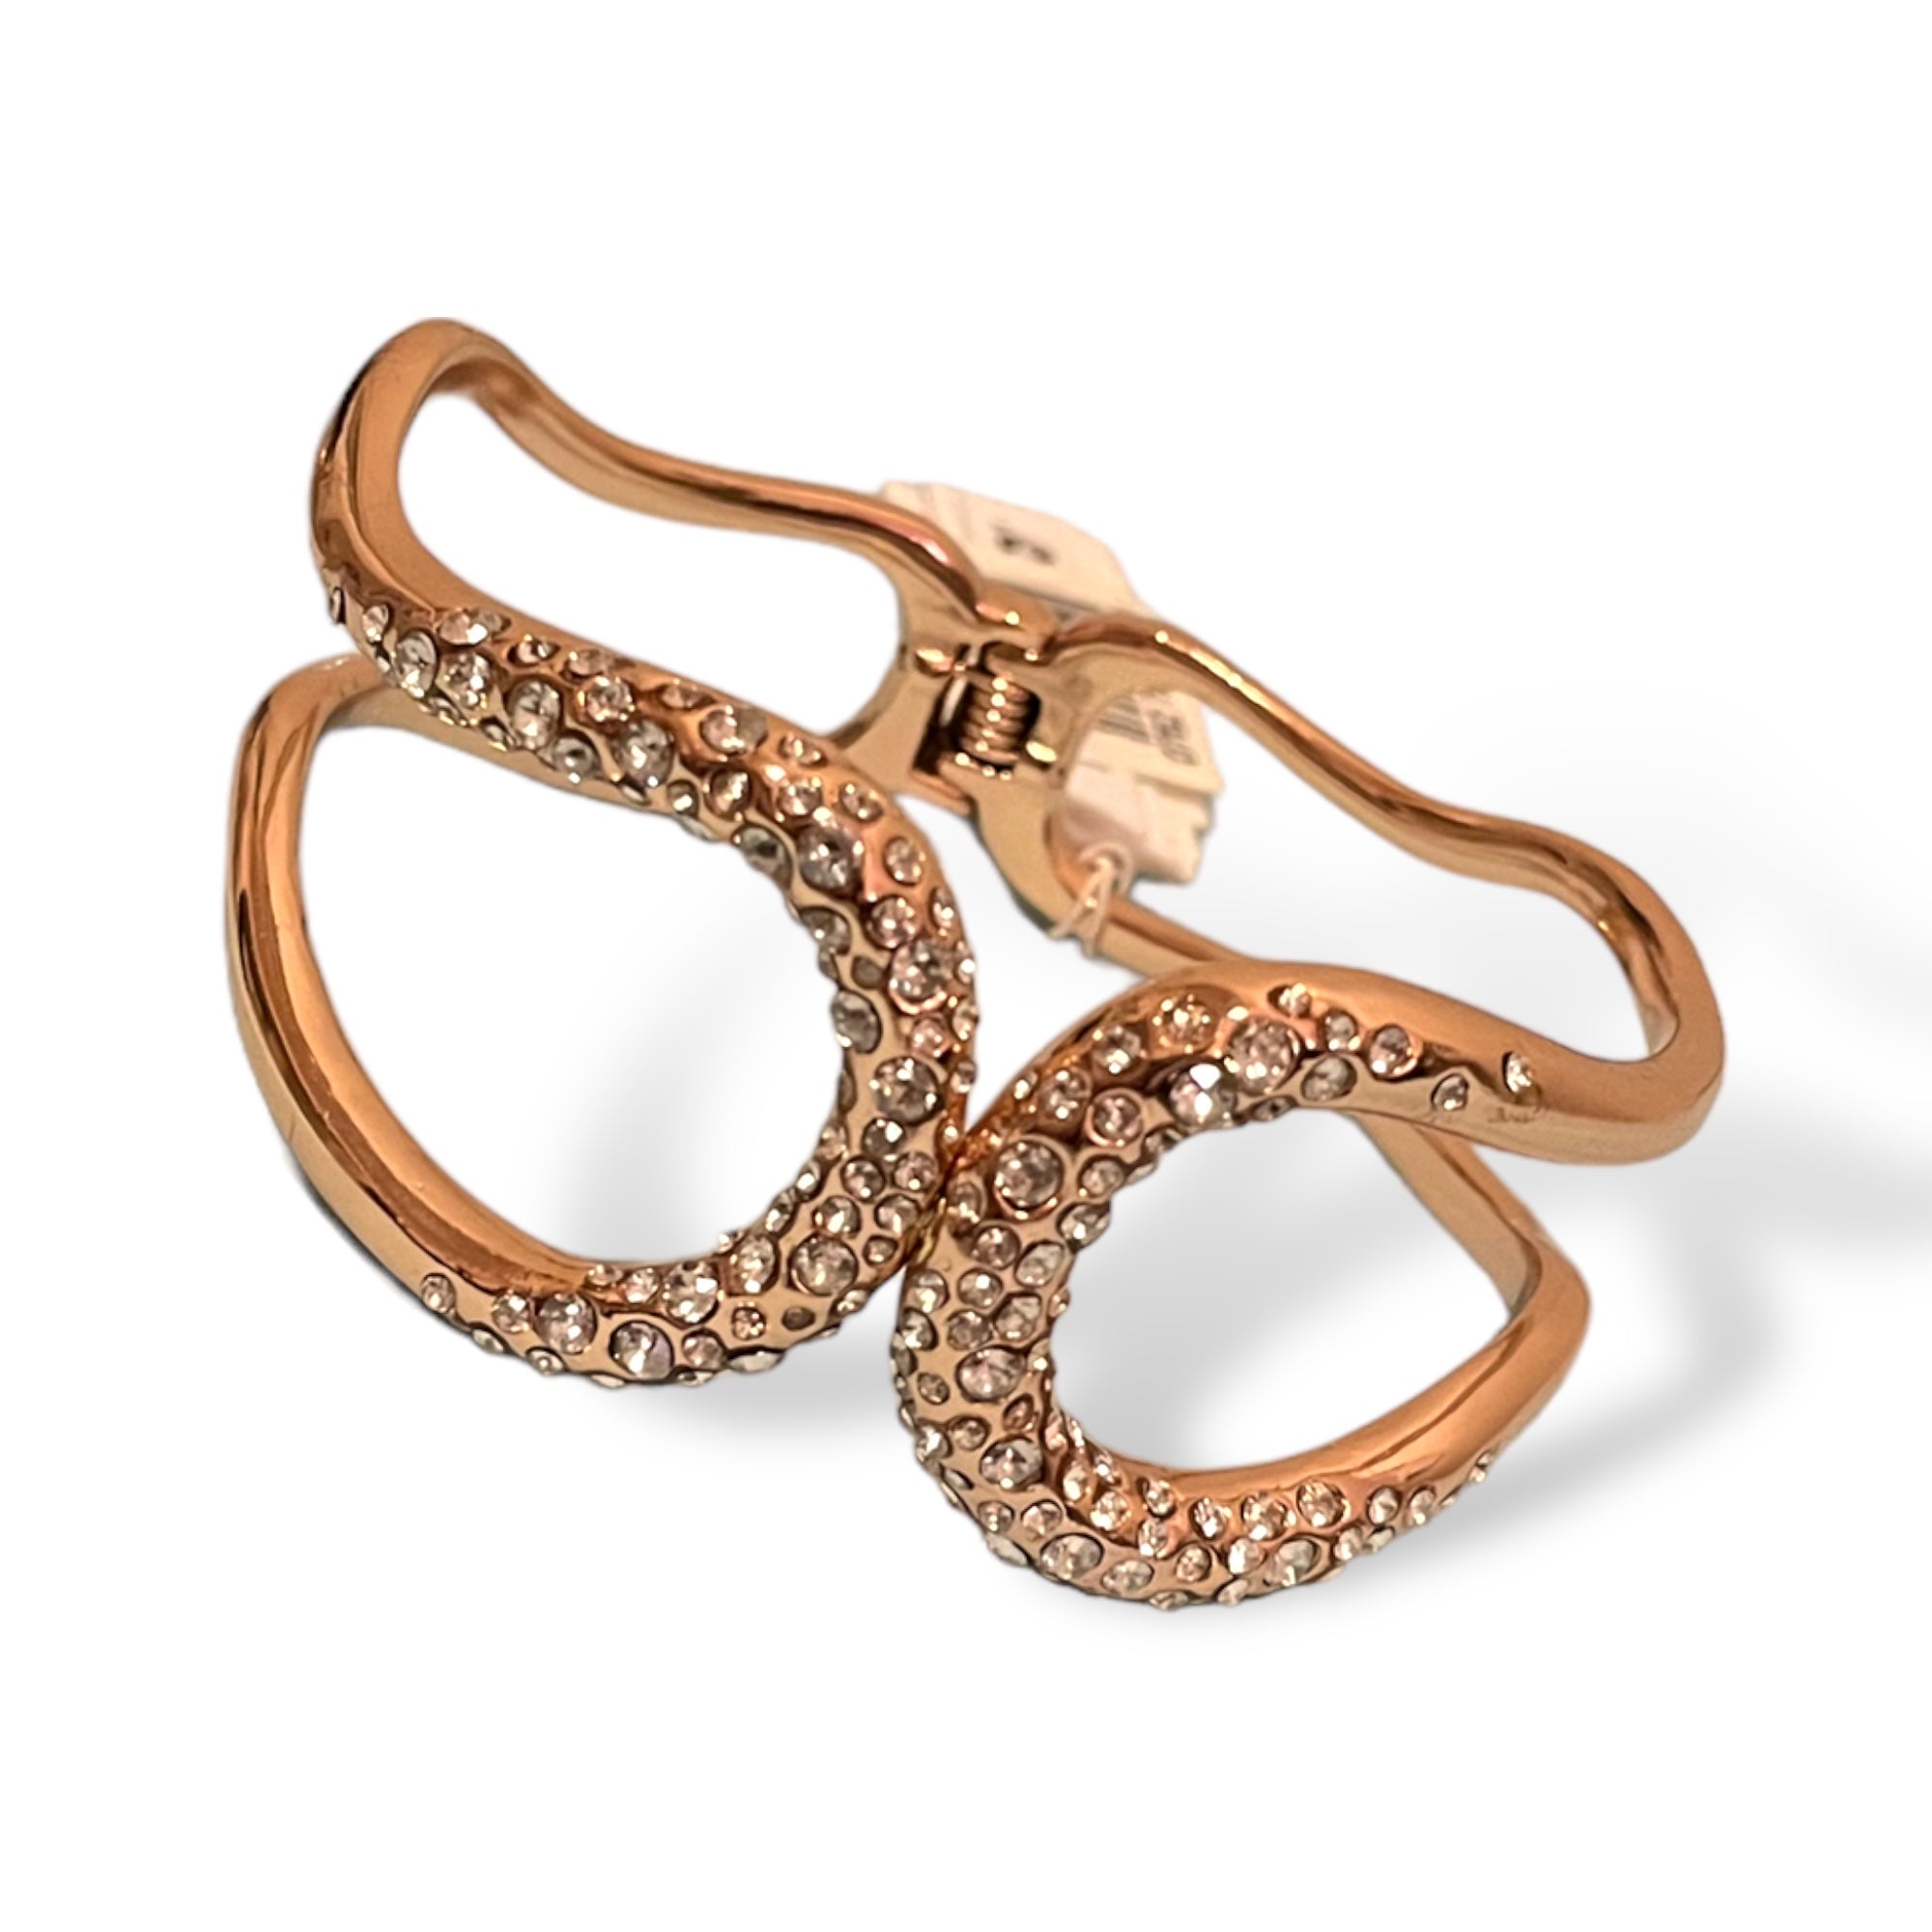 ALEXIS BITTAR Crystal Encrusted 18k Rose Gold Plated Cuff